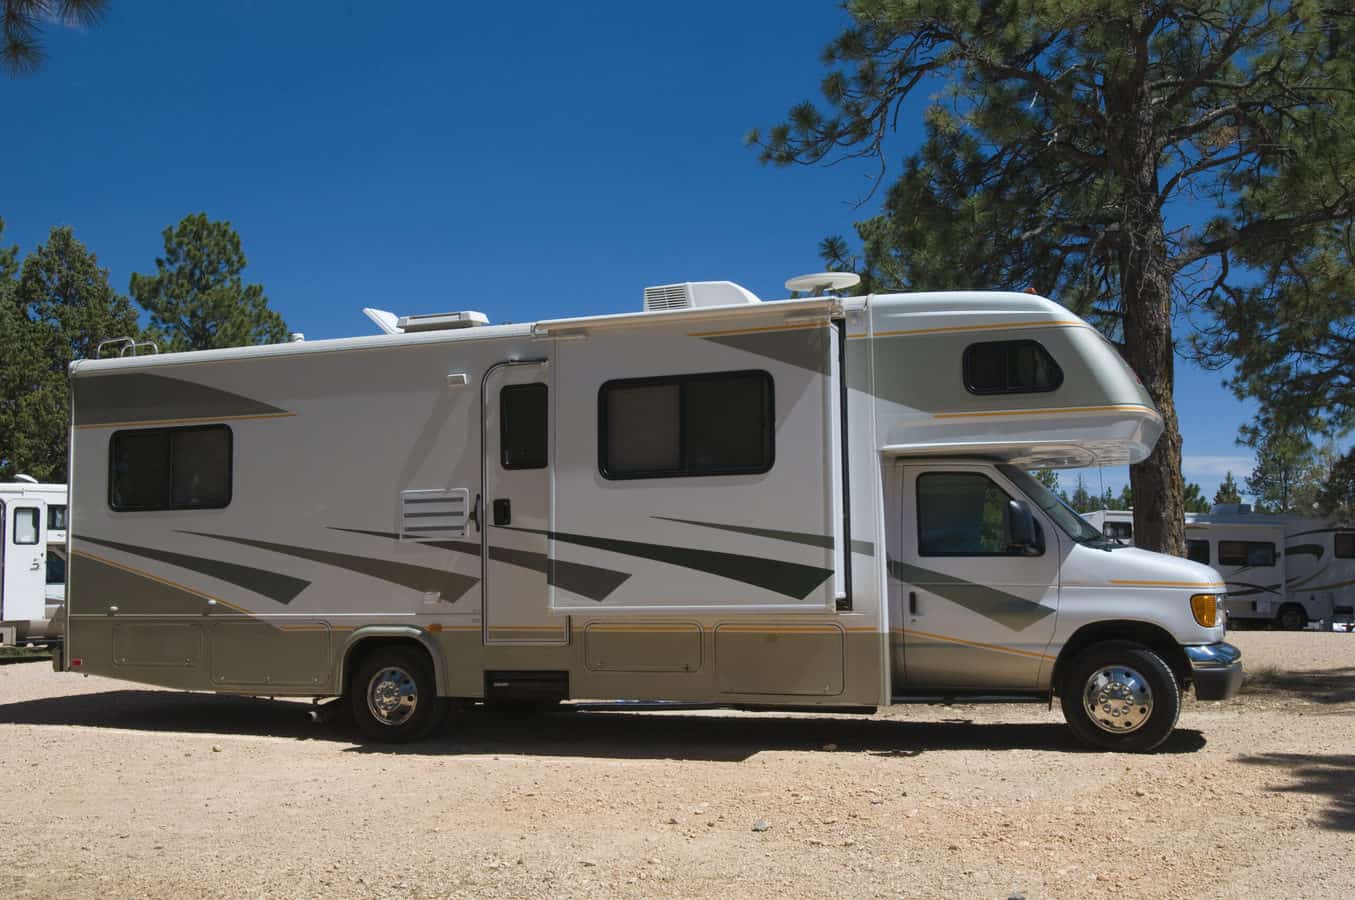 Class C motorhome in lot - feature image for Selling An RV Privately